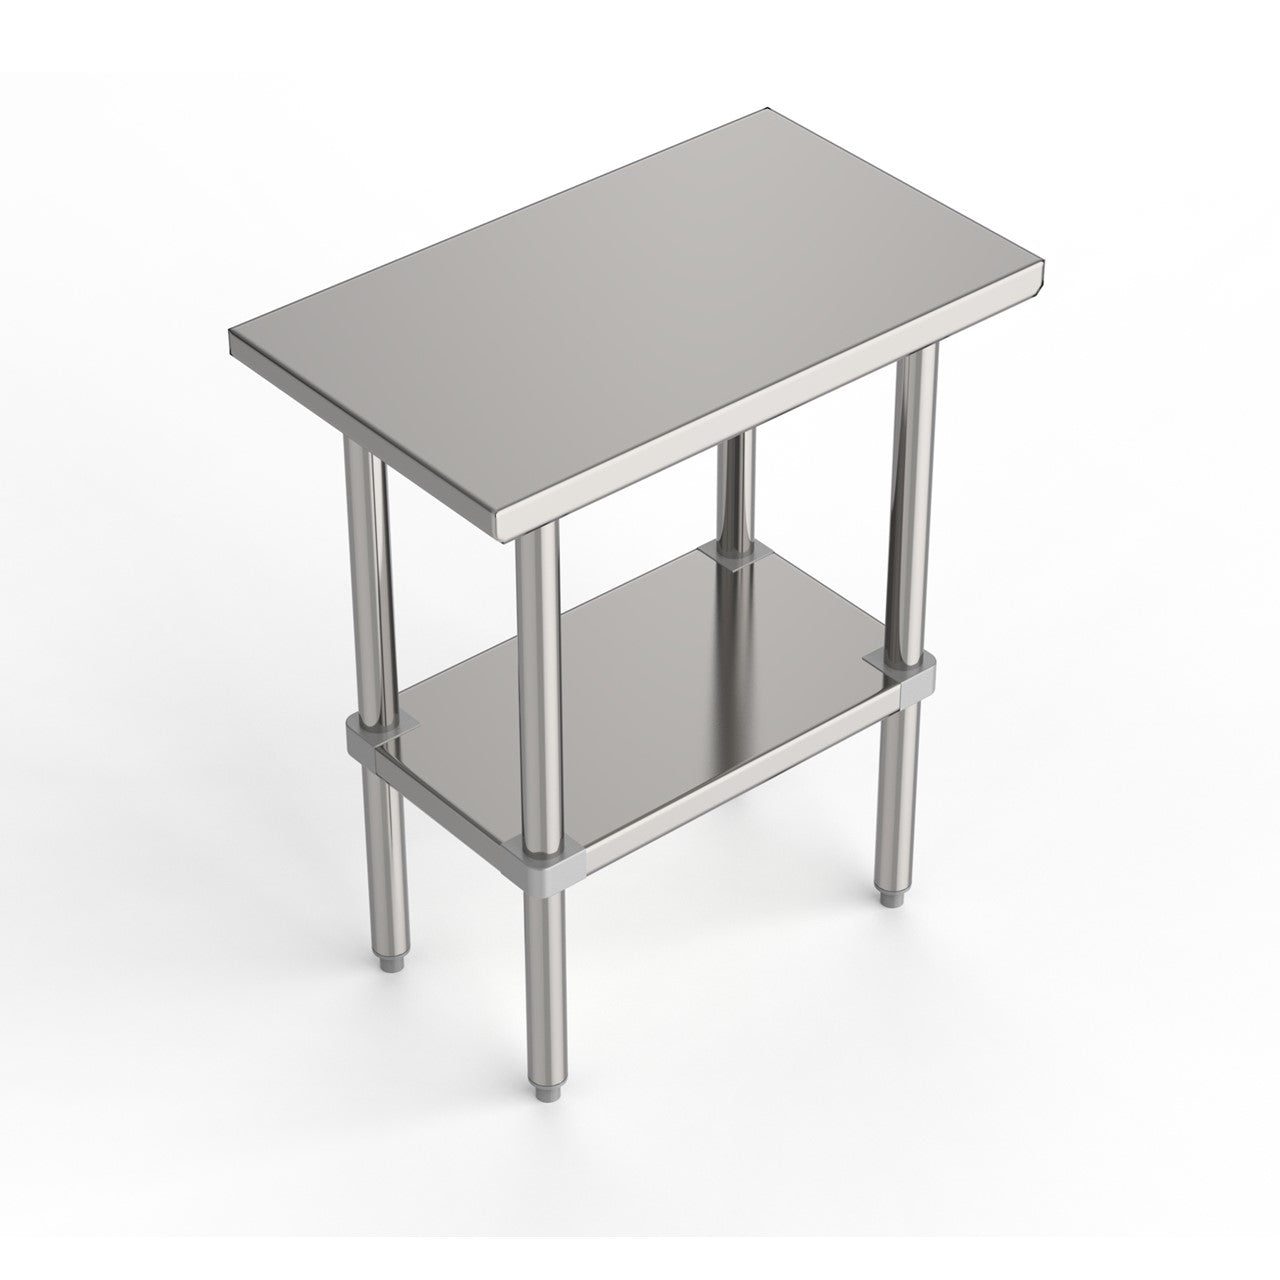 GSW Commercial Grade Flat Top Work Table with Stainless Steel Top, Galvanized Undershelf & Legs, Adjustable Bullet Feet, NSF/ETL Approved to Meet Sanitation Food Service Standard 37 (30"W x 18"L x 35"H)